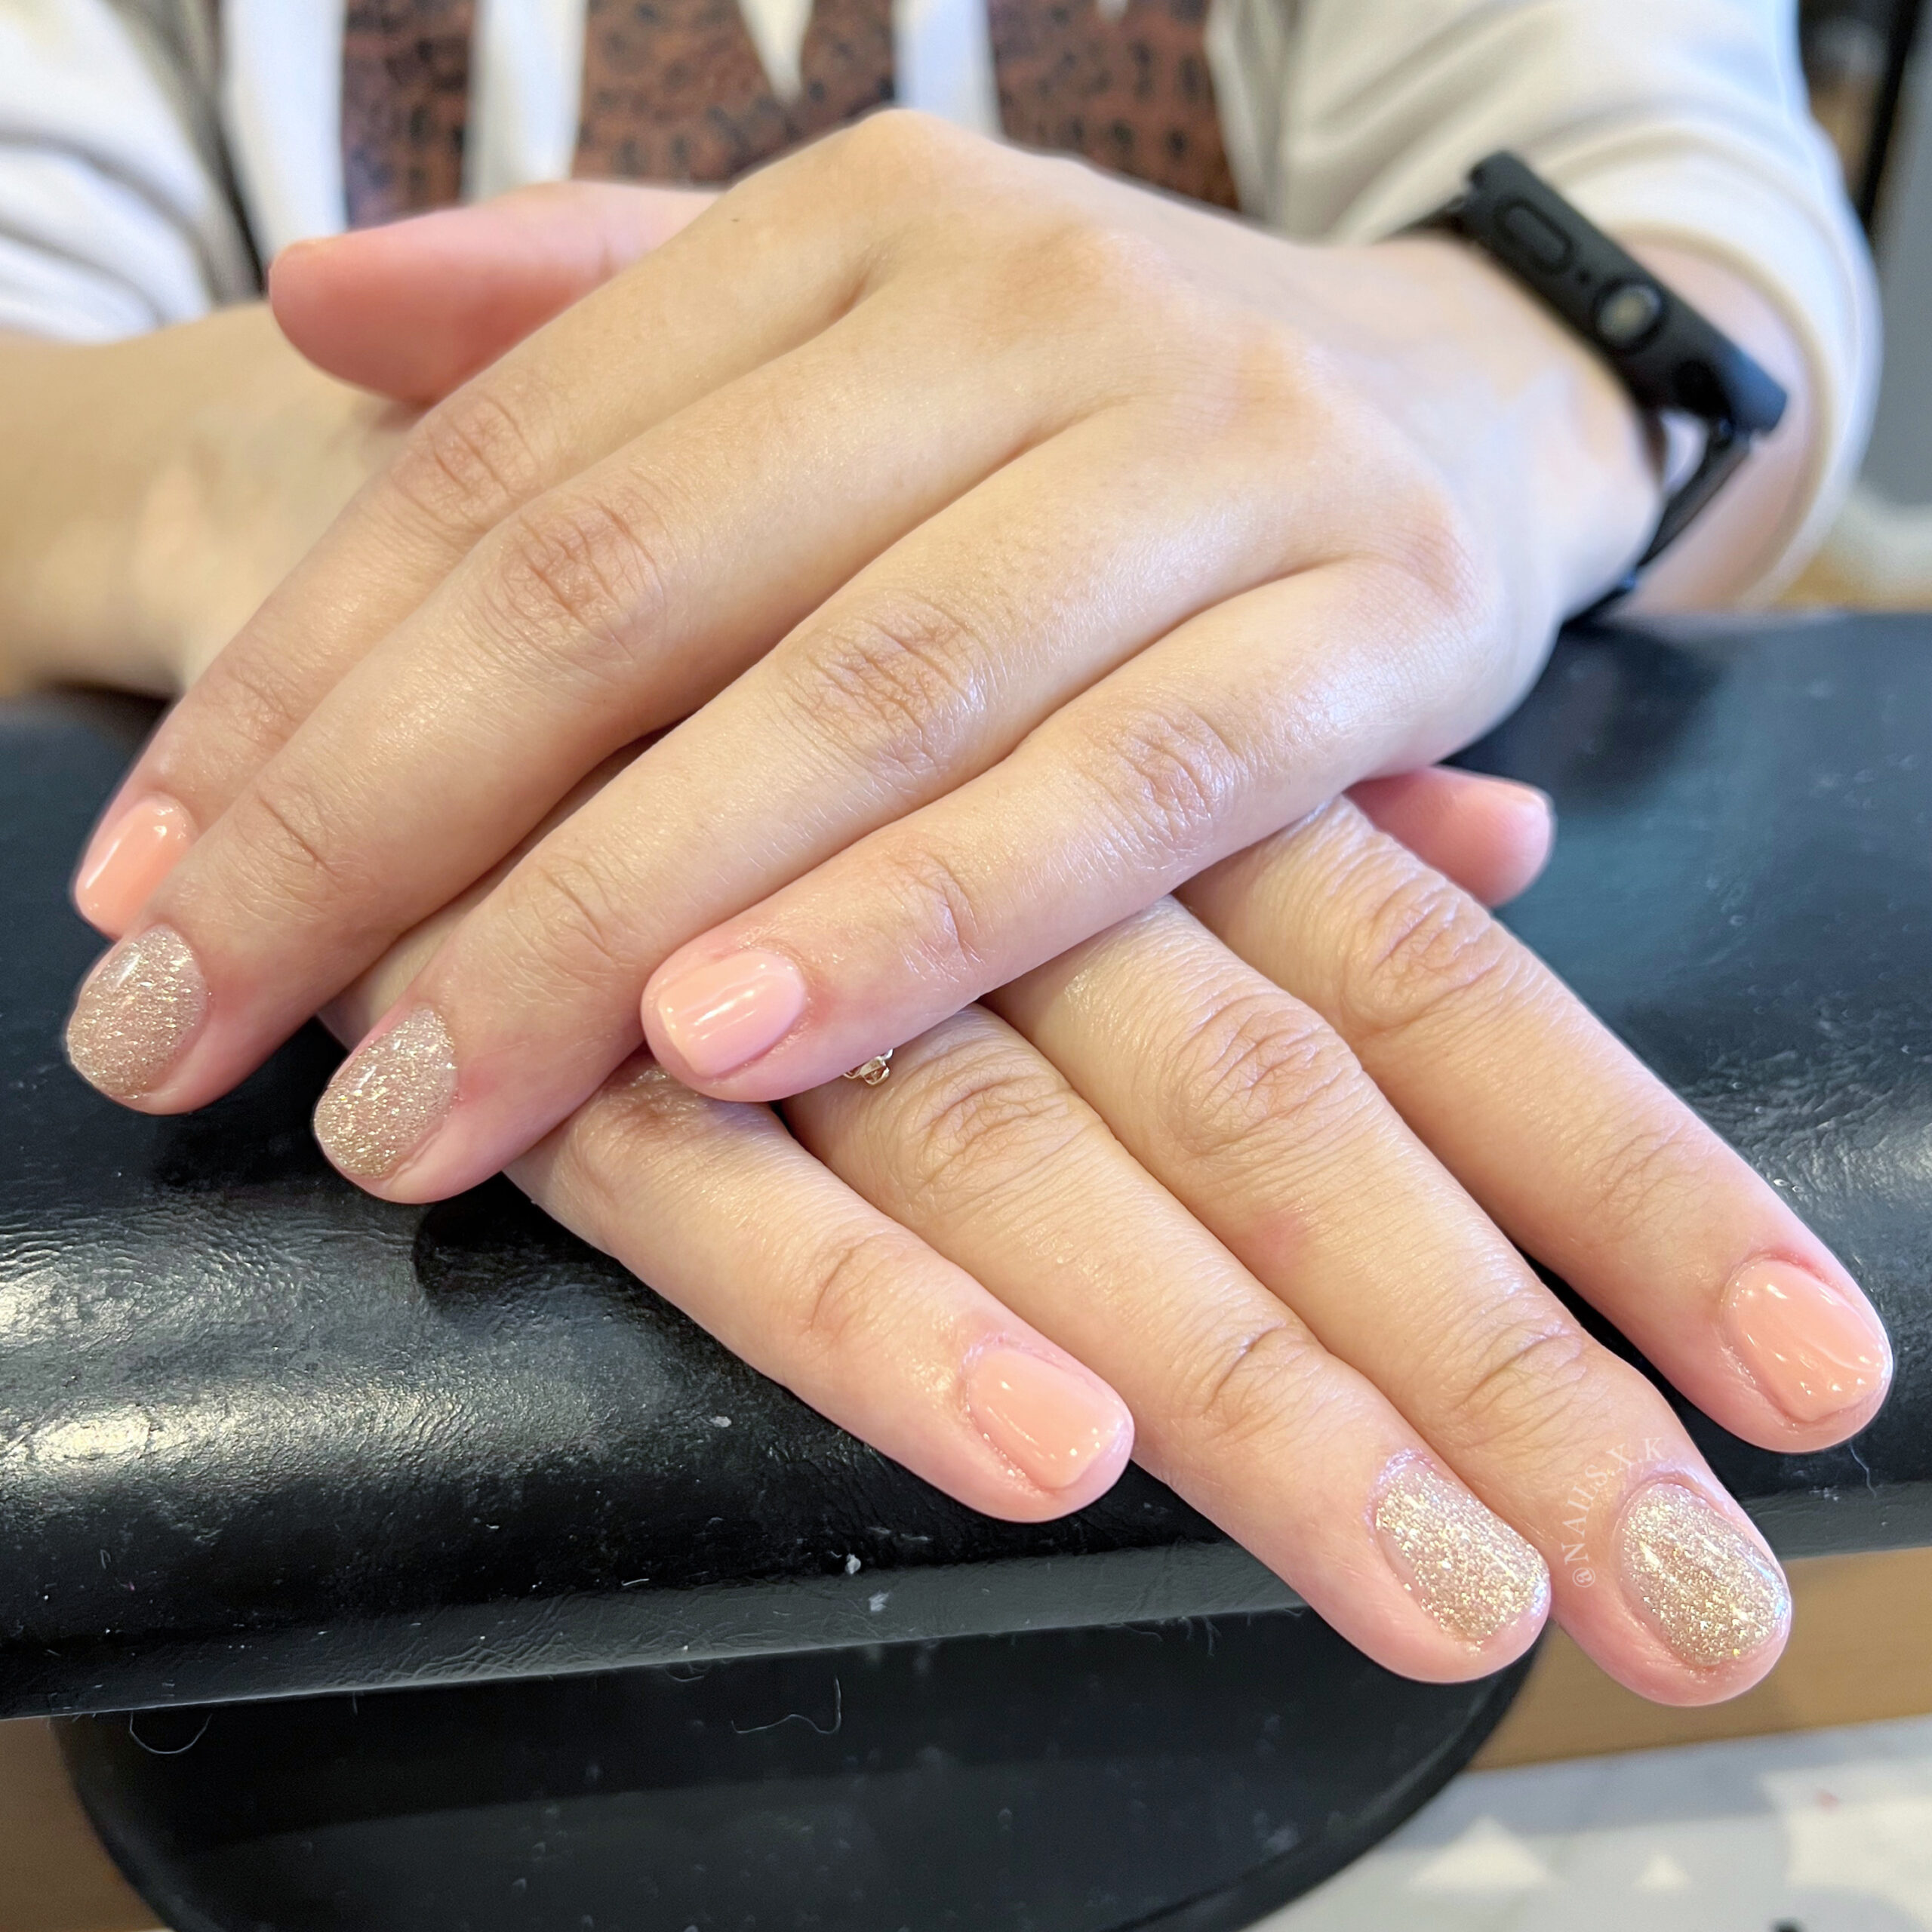 Gel manicure with nude pink and gold glitter accents. Nails by K